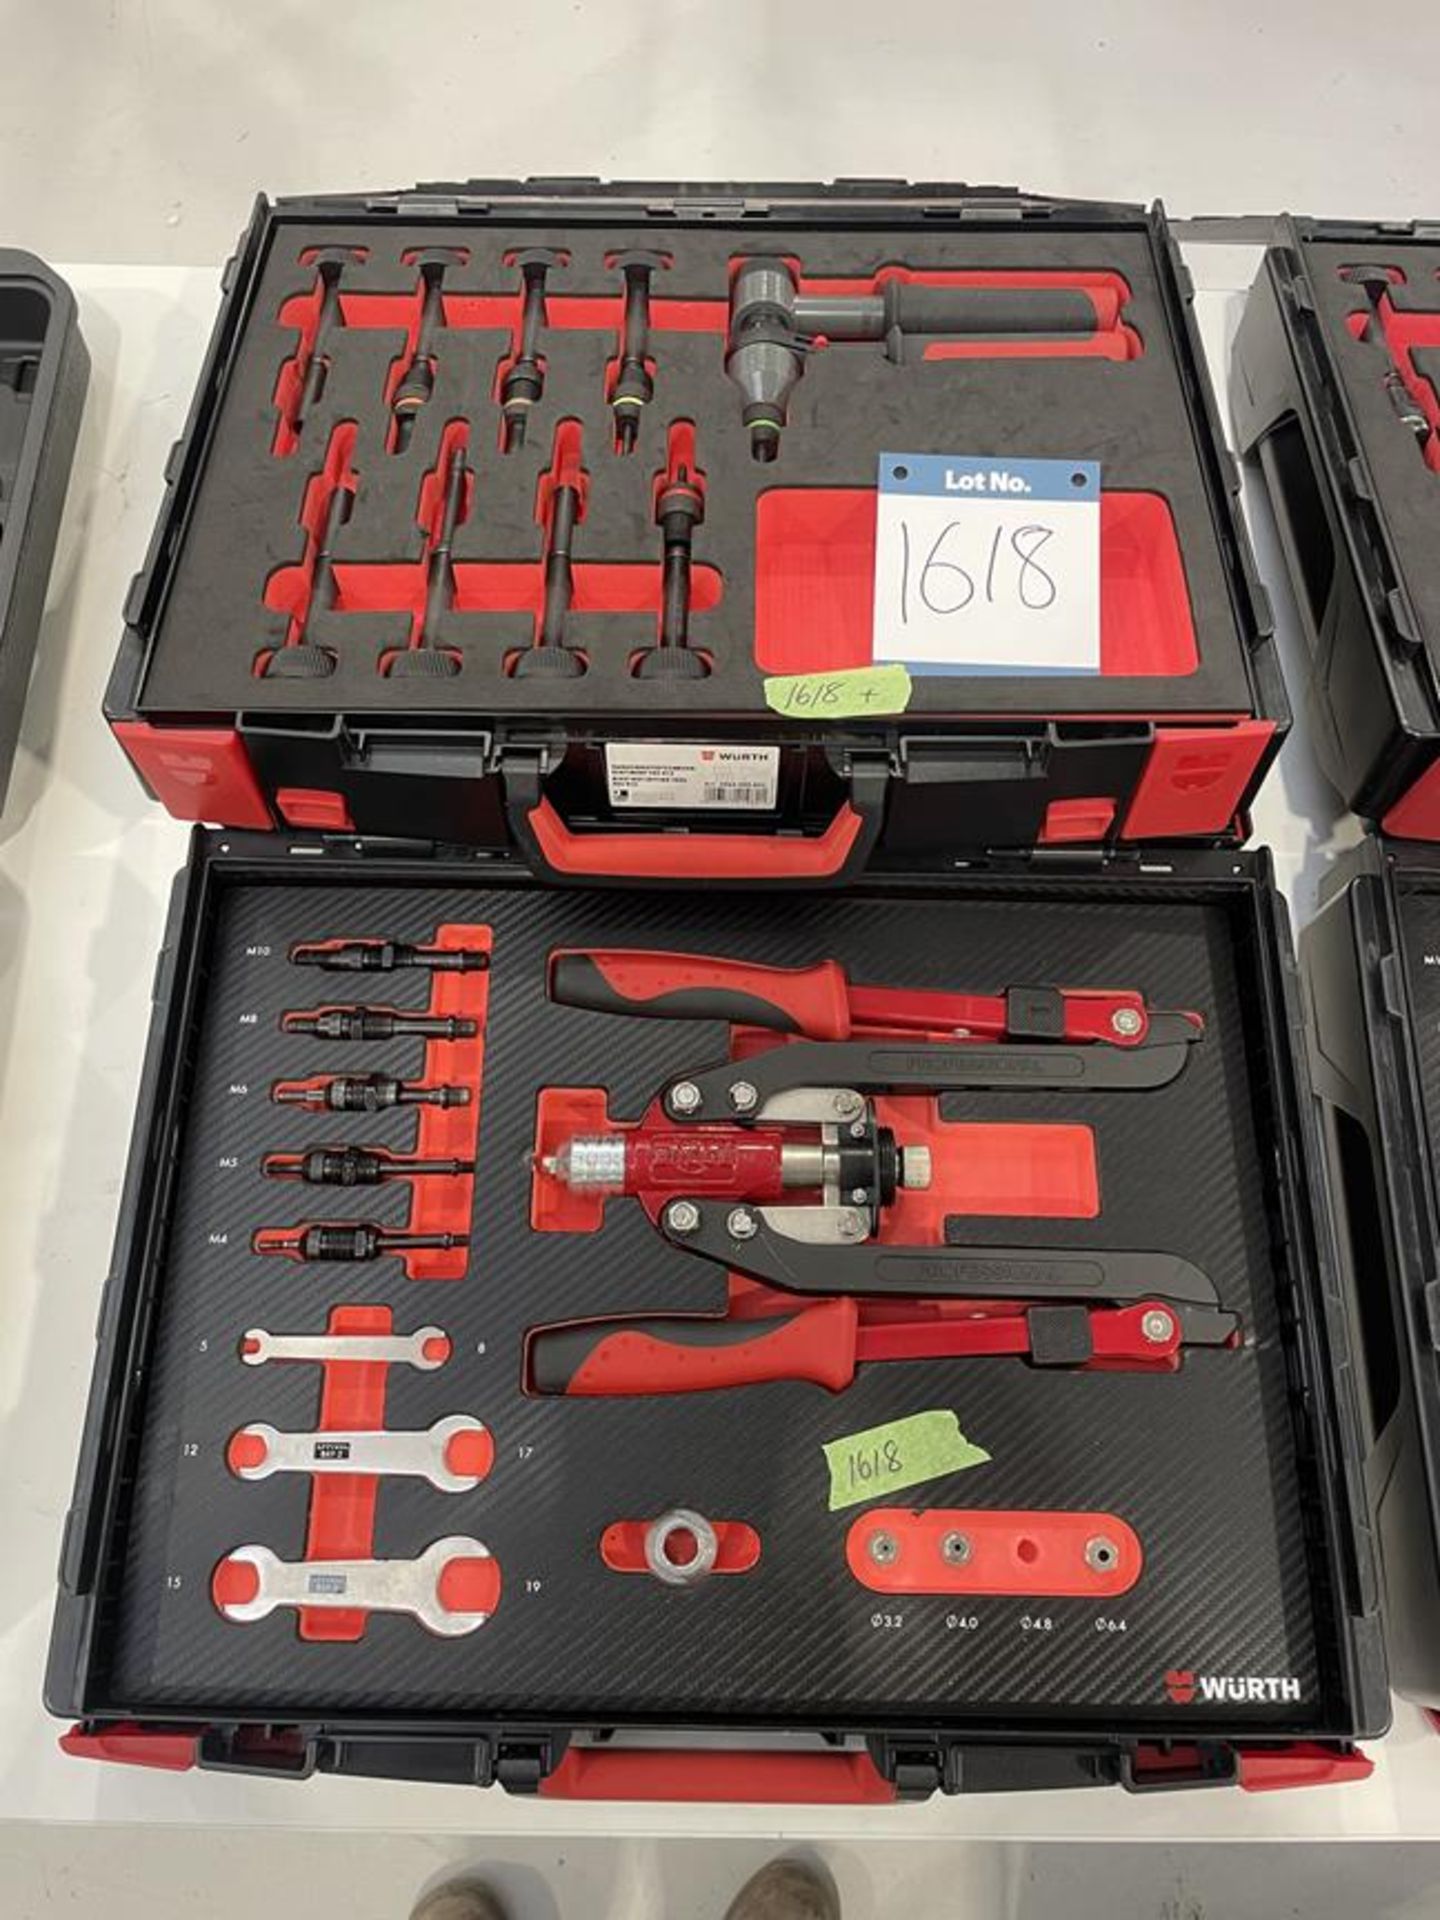 Wurth, HES412 nut setting tool set (slightly incomplete) and hand rivet tool combi